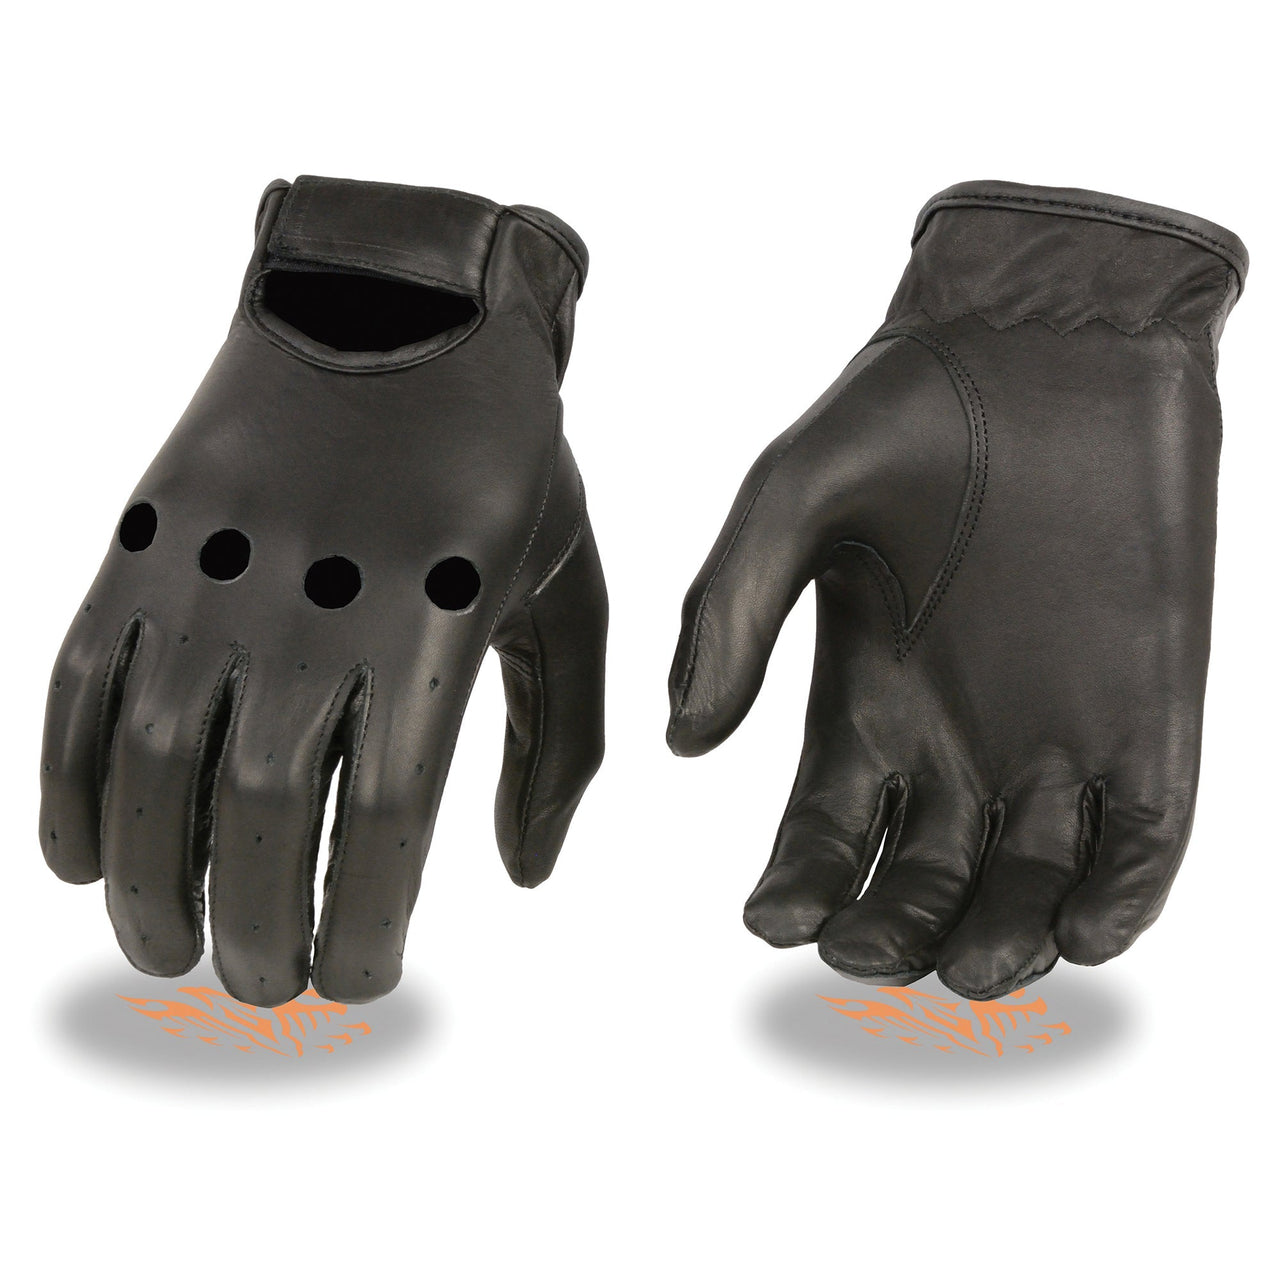 Men's Unlined Leather Classic Style Driving Gloves - HighwayLeather